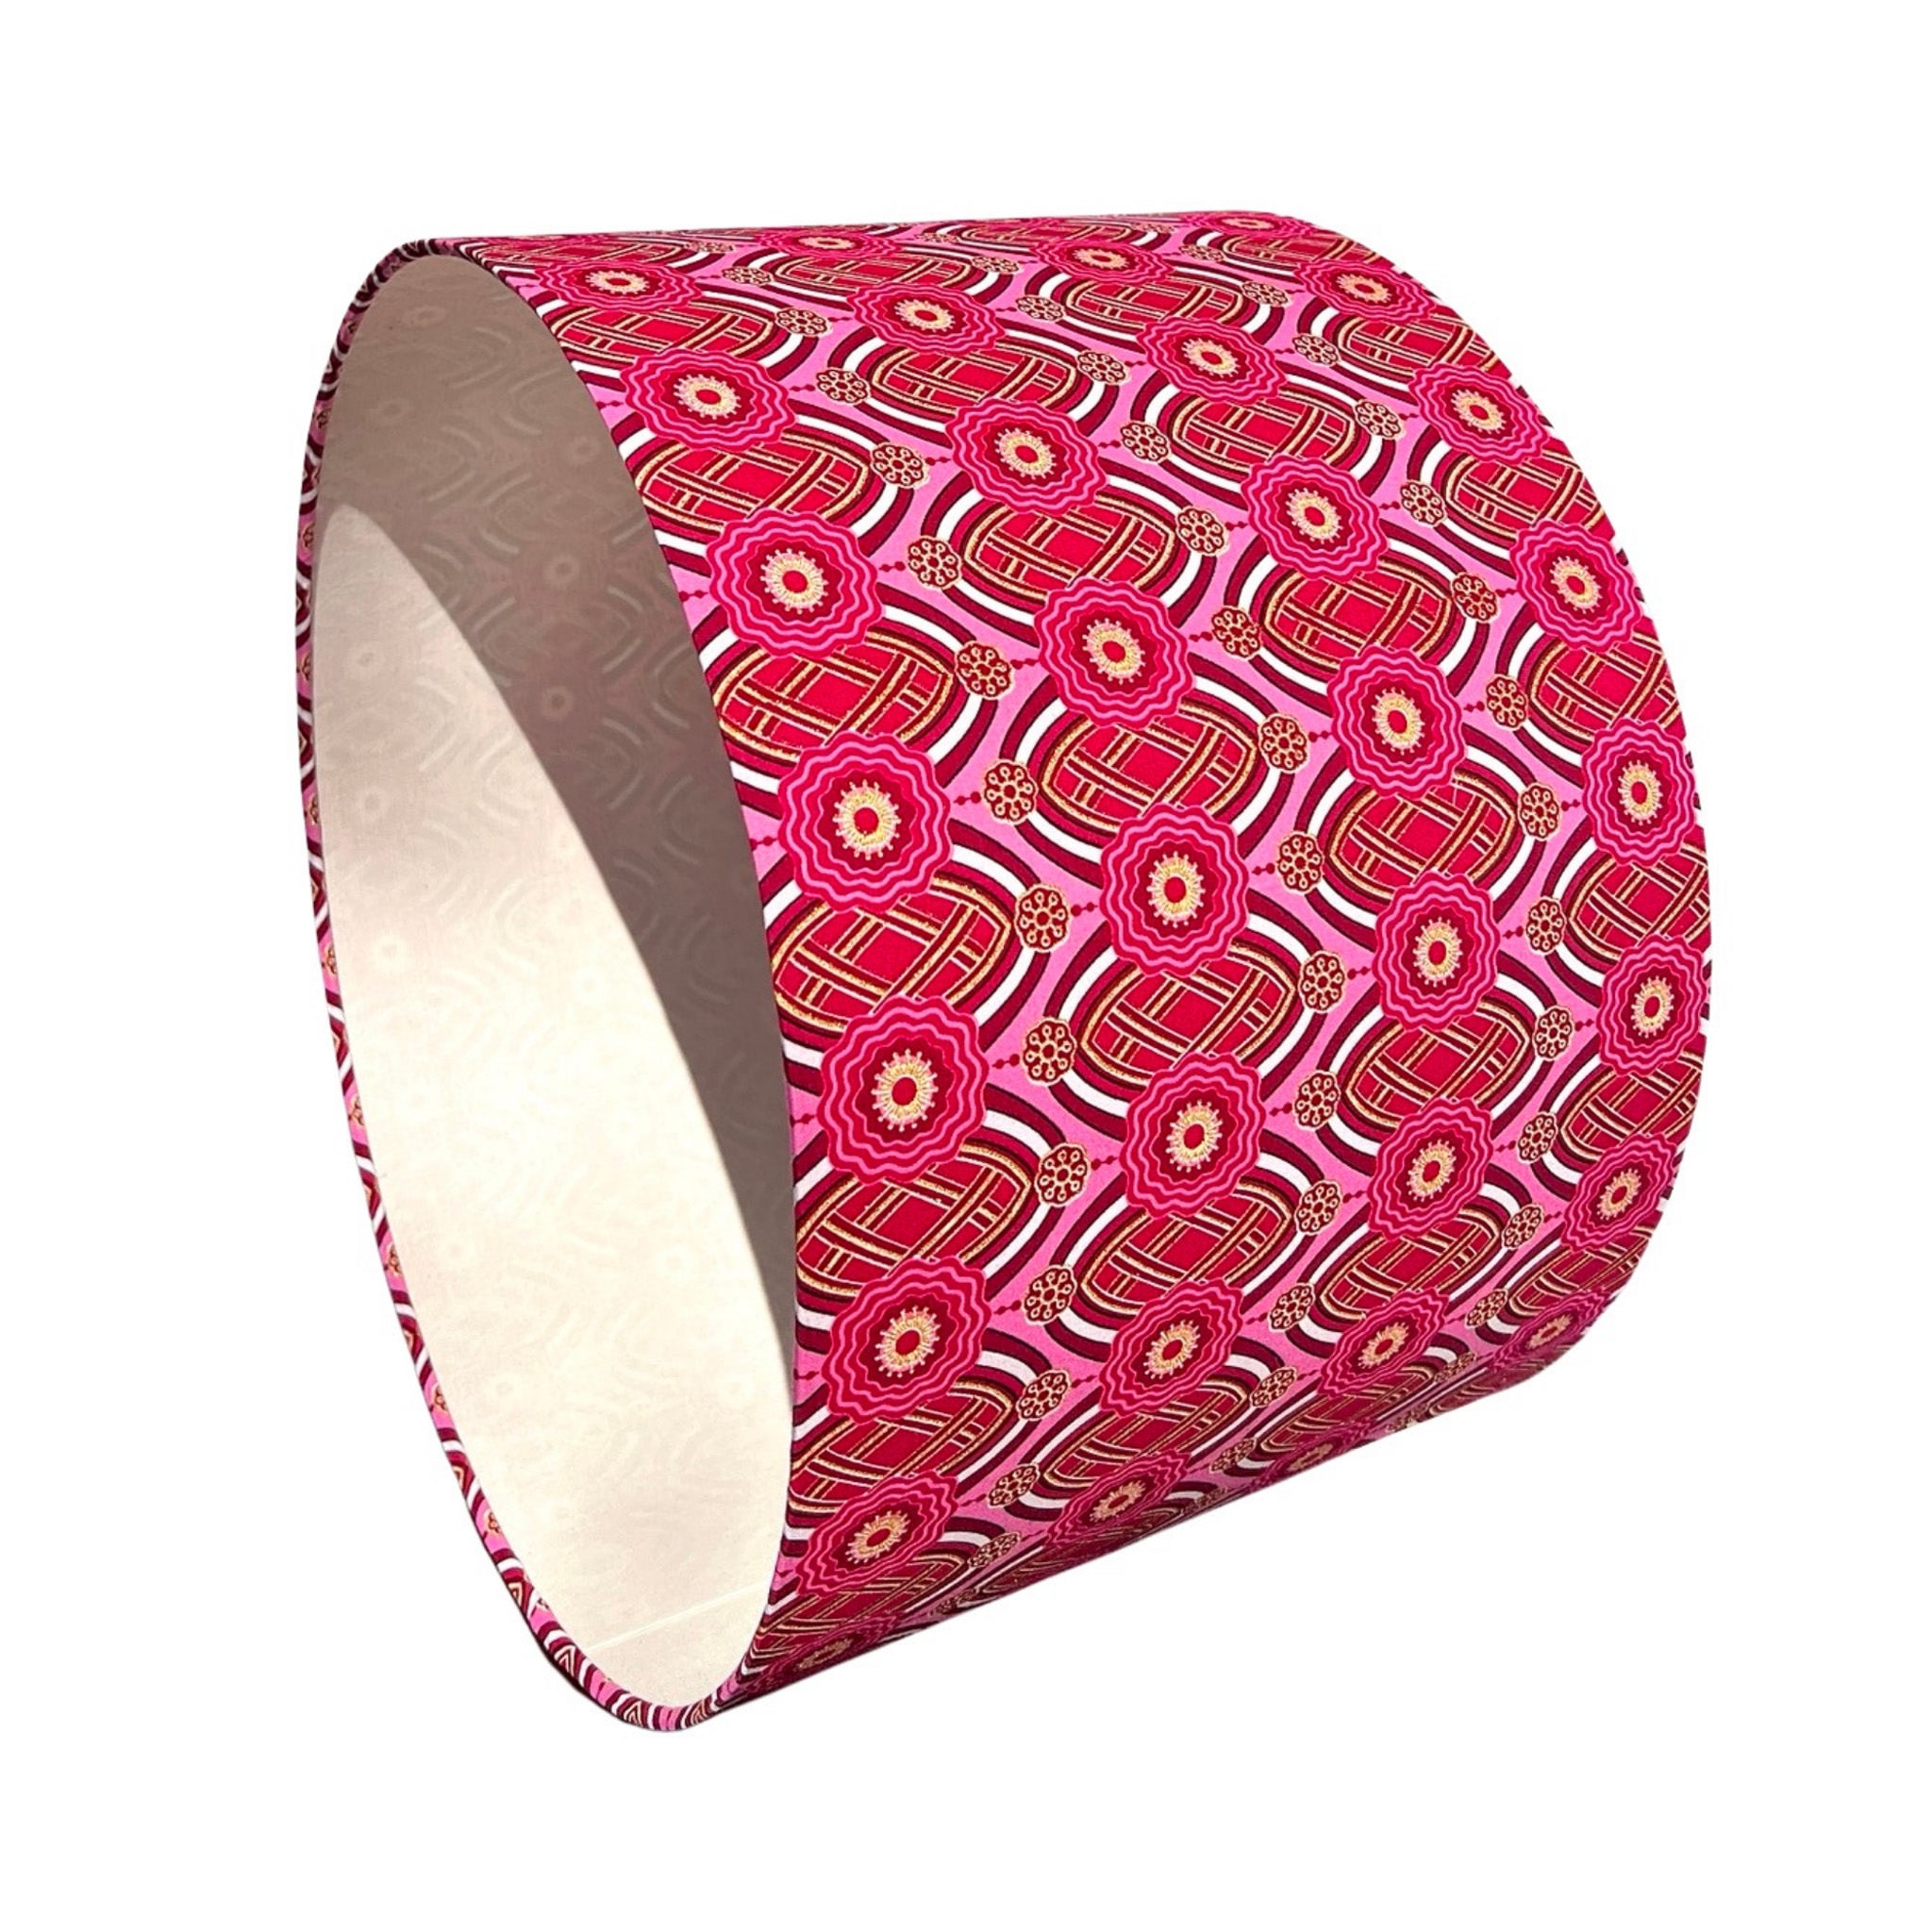 Georgina / Pink and Red Abstract African Drum Bespoke Lamp Shade